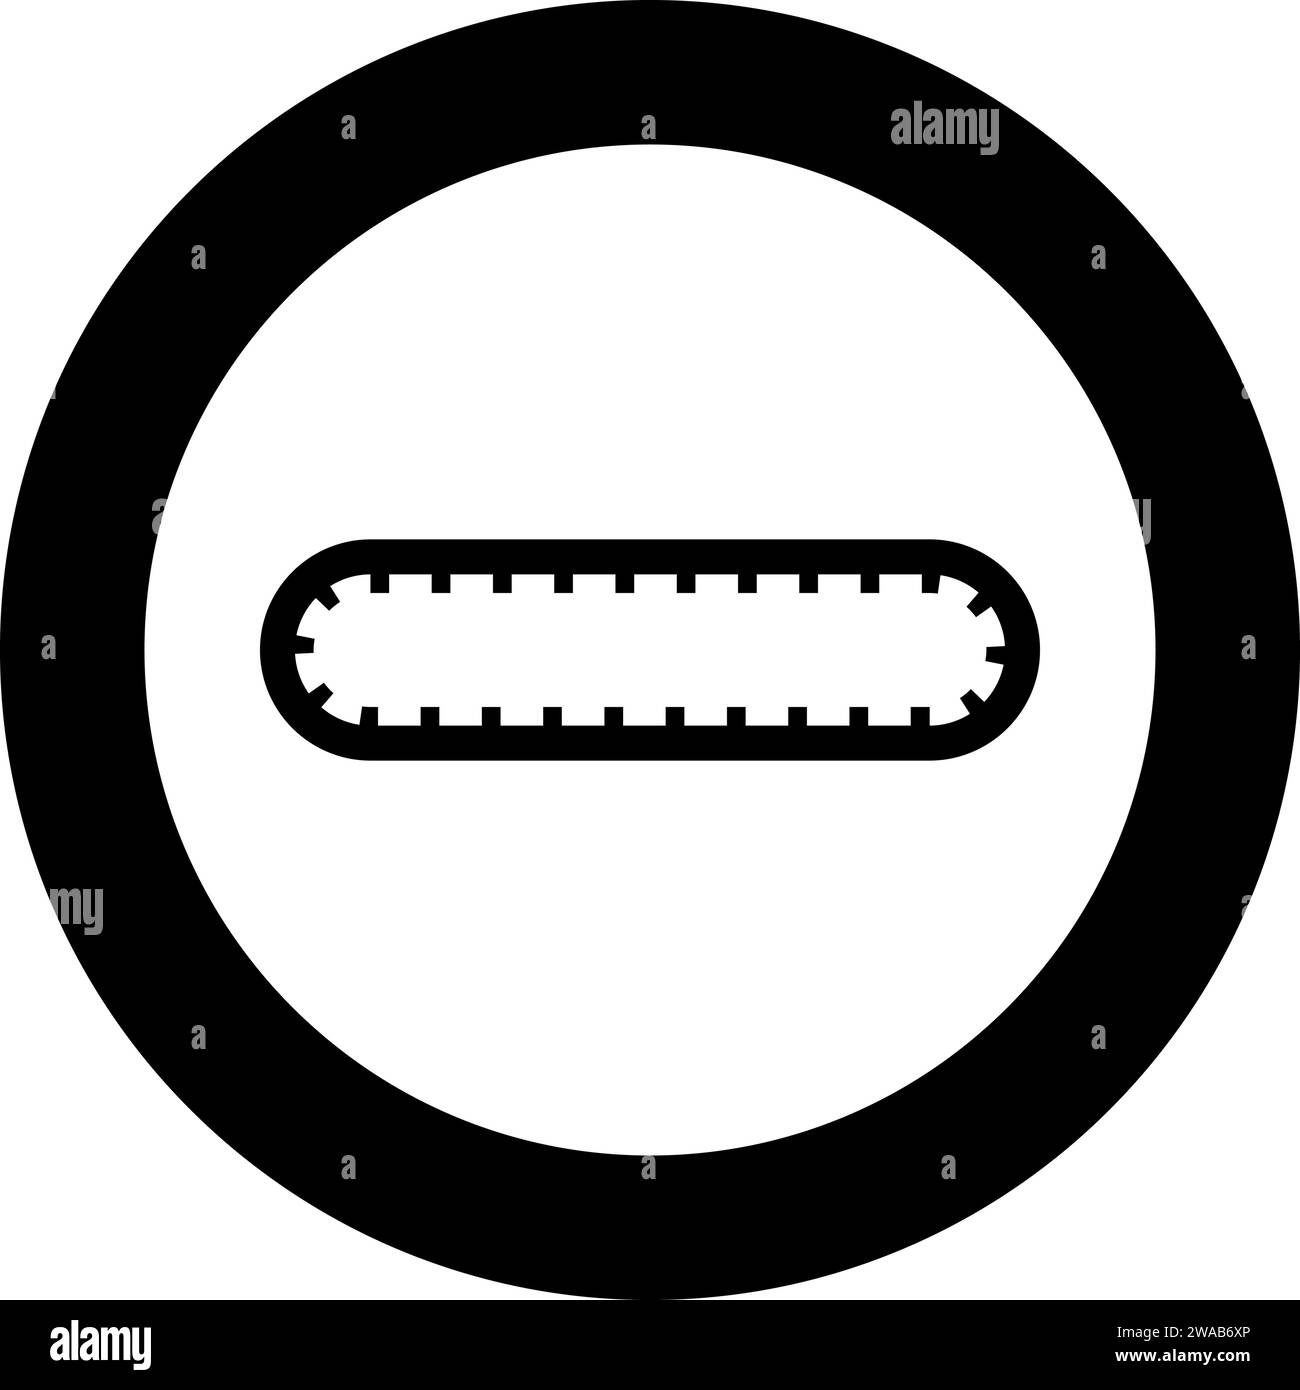 Strap for engine toothed belt for gear cambelt timing gas distribution mechanism icon in circle round black color vector illustration image solid Stock Vector